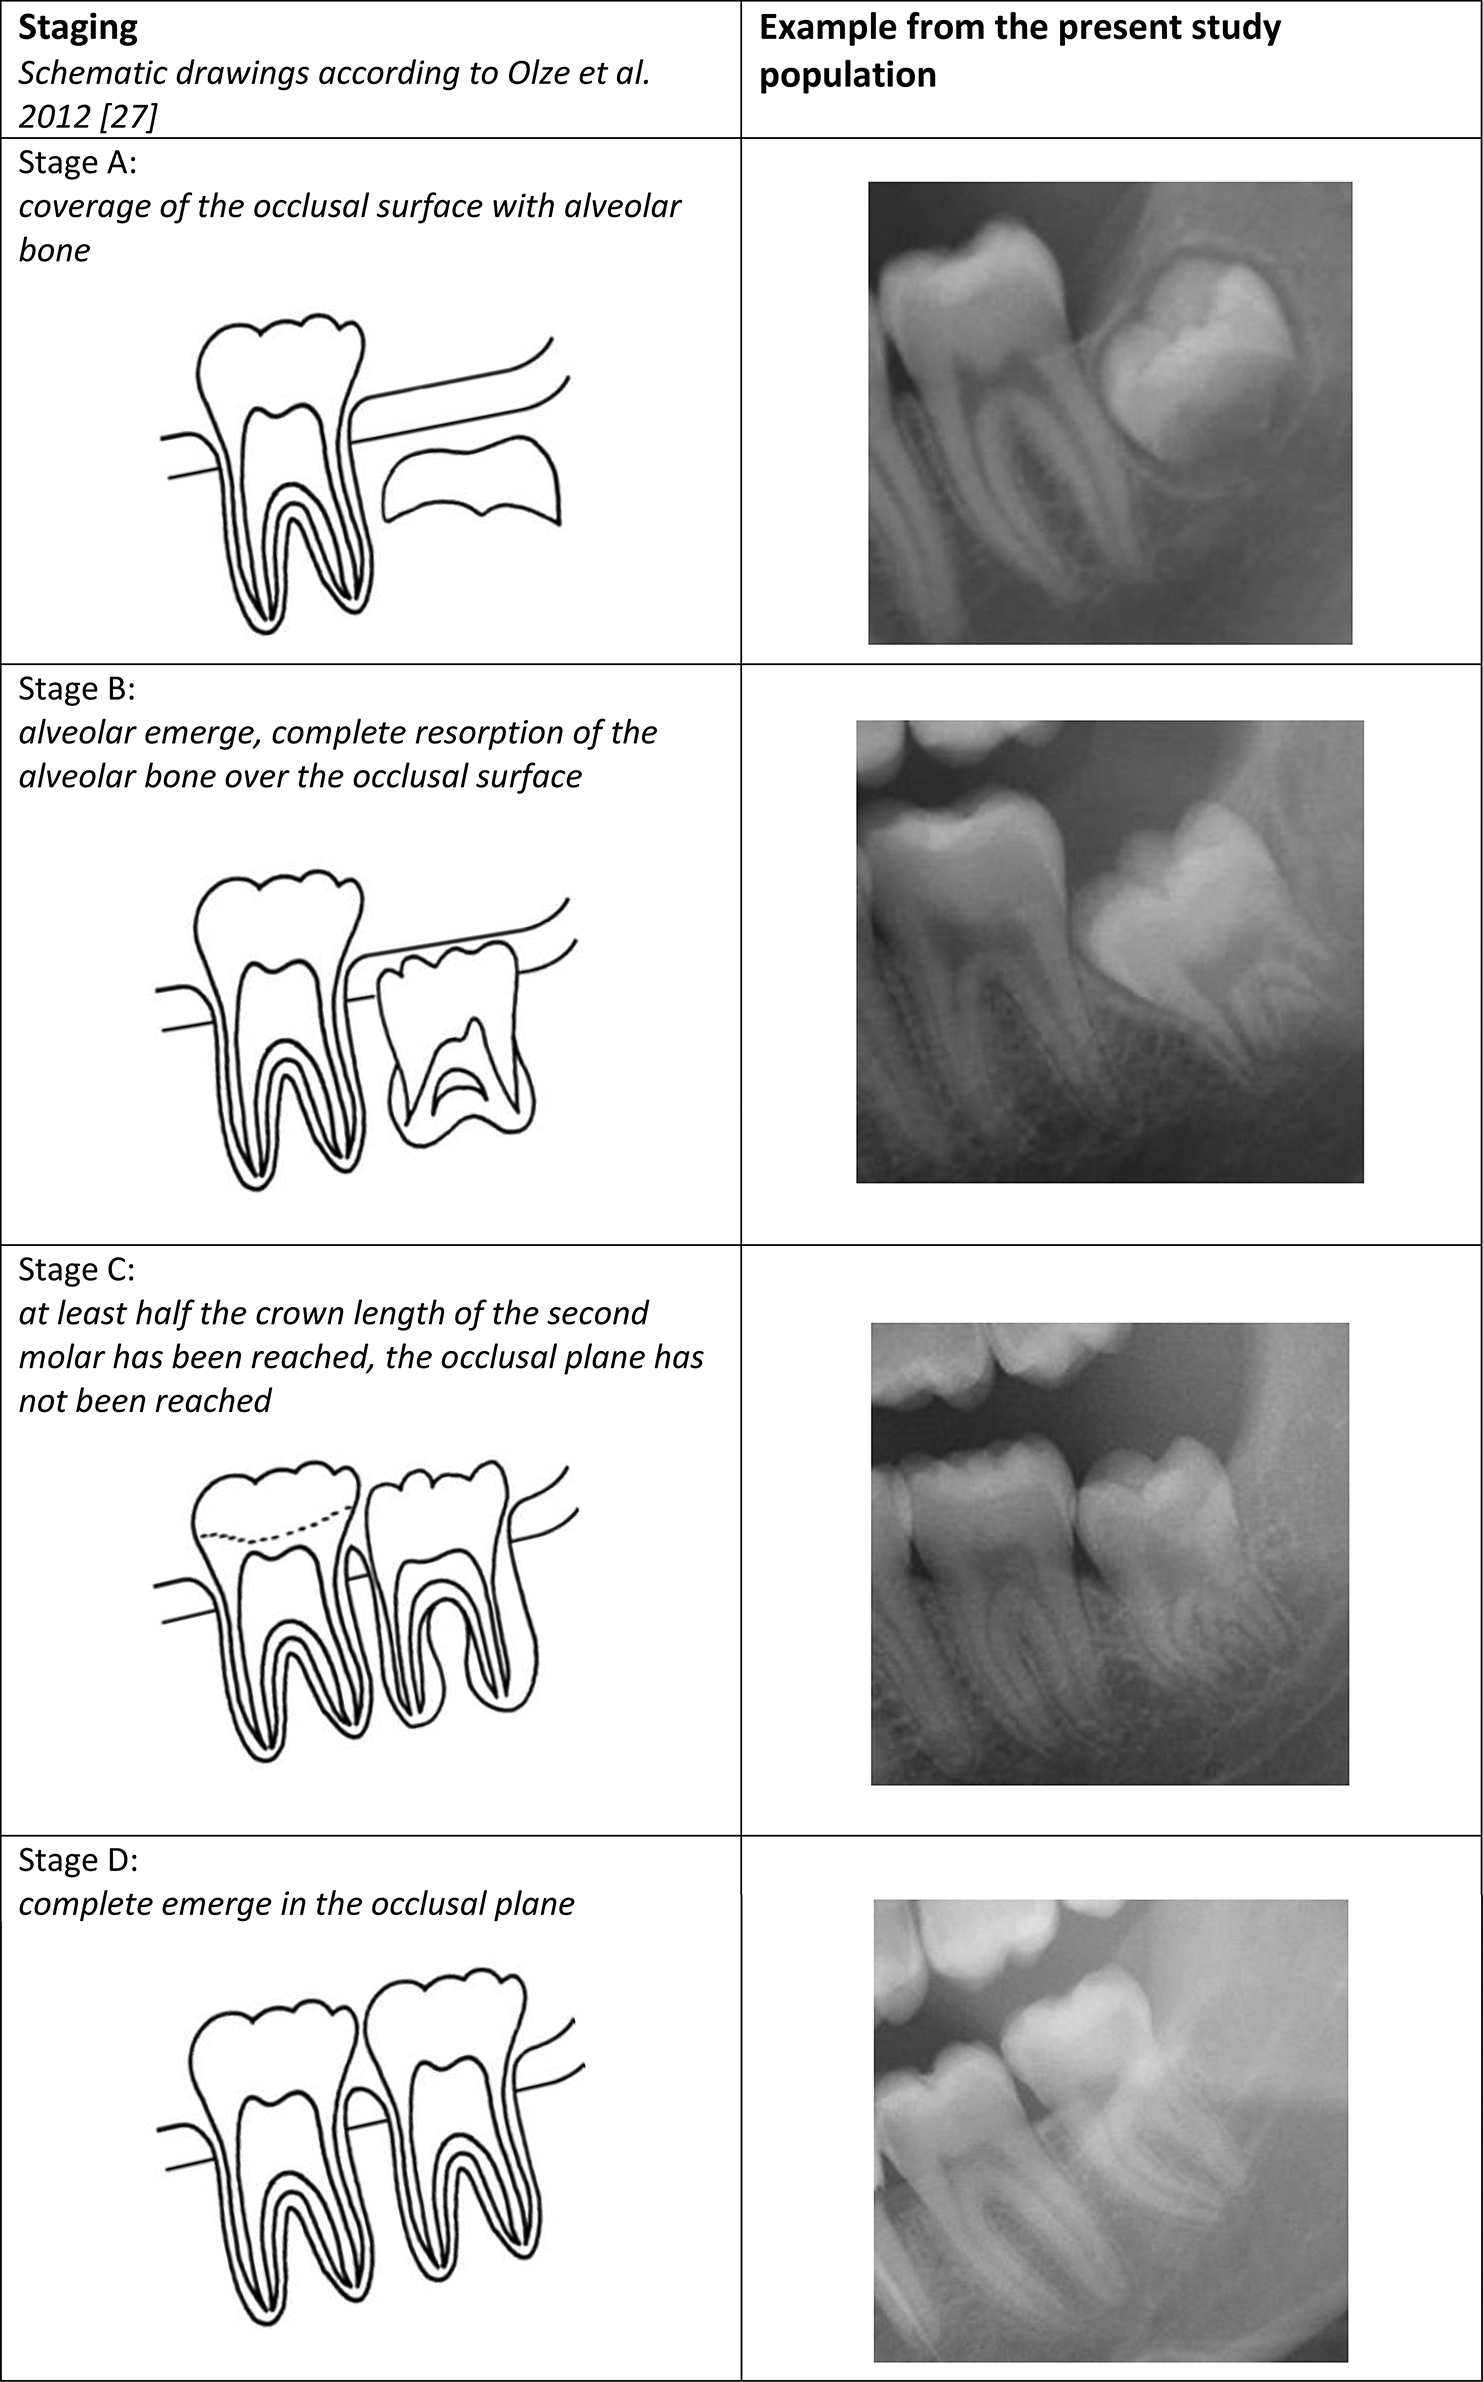 Third molar eruption in dental panoramic radiographs as a feature for forensic age assessment – new reference data from a German population